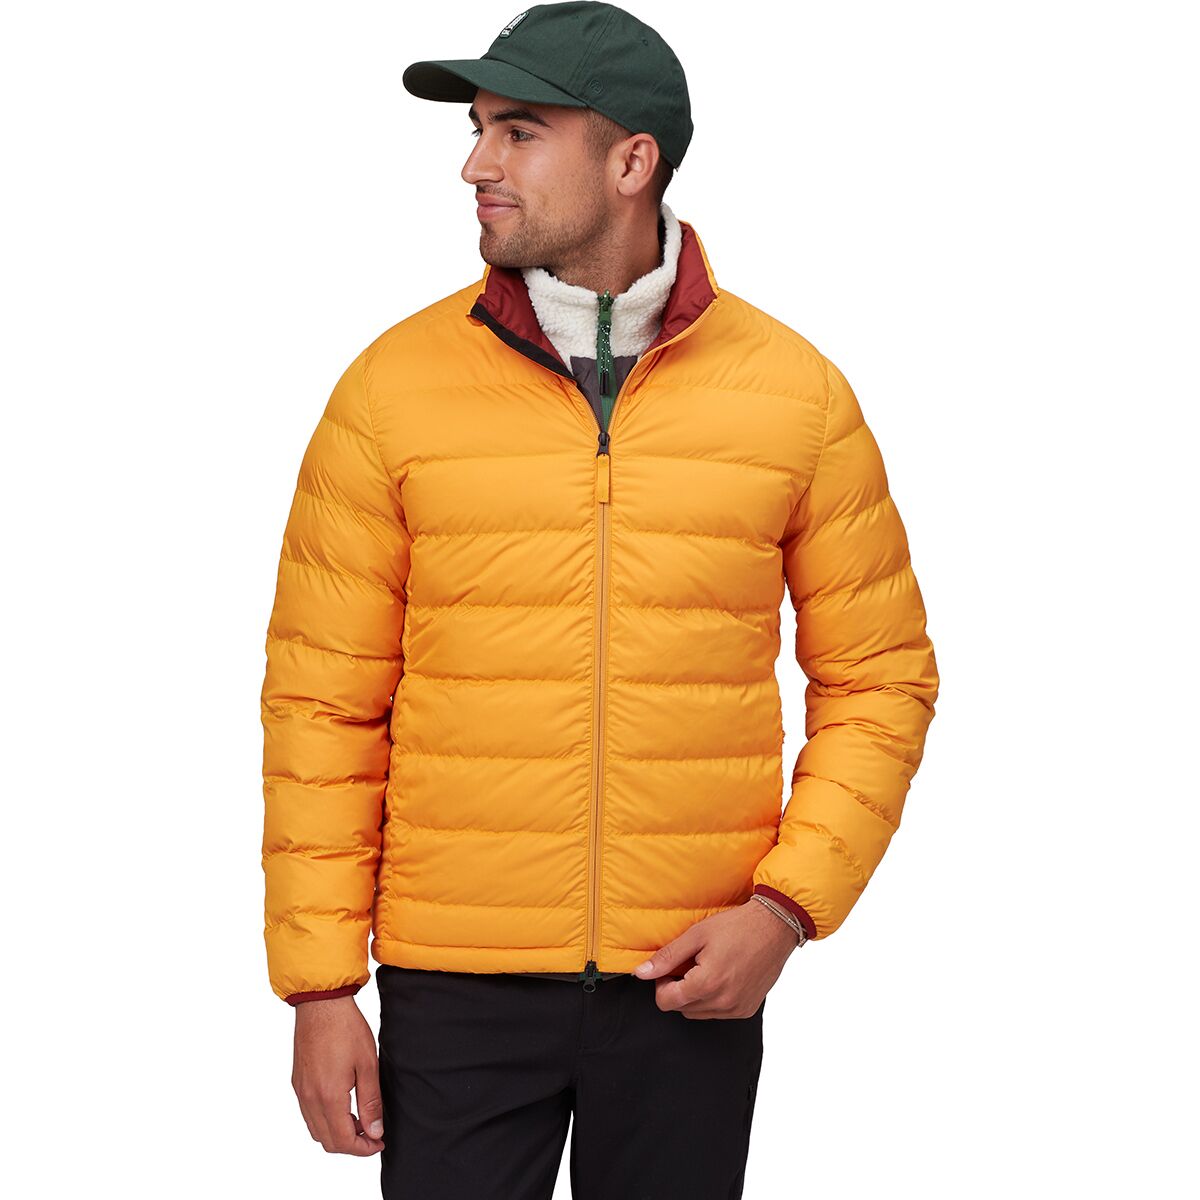 Stoic Insulated Jacket - Men's